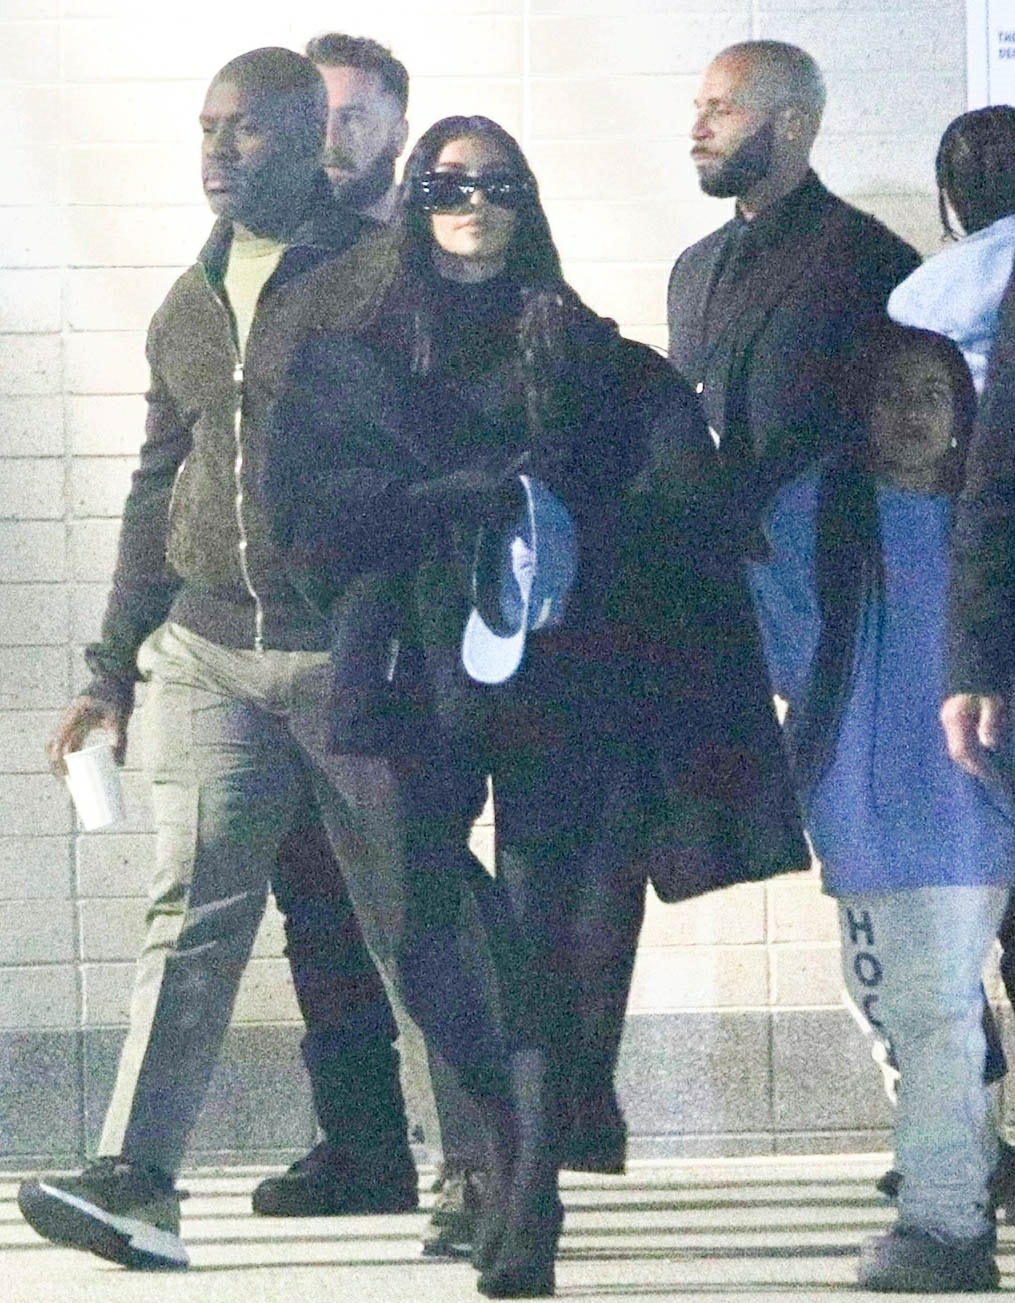 Kim Kardashian, North West, Saint West, and Corey Gamble leave the Free Larry Hoover Benefit Concert